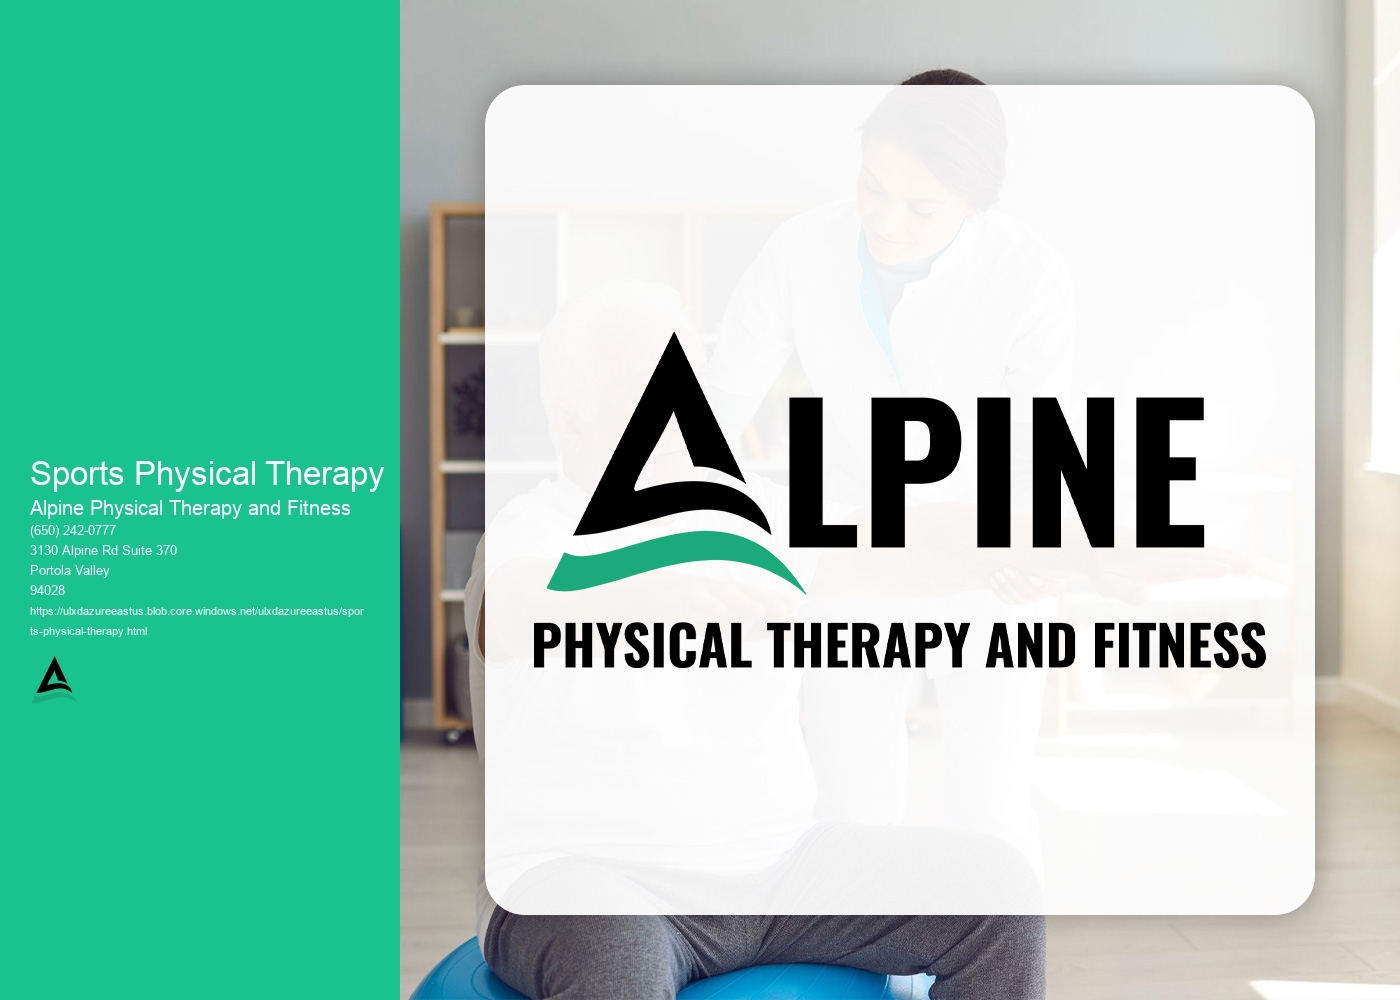 Can sports physical therapy help improve athletic performance and prevent future injuries, and if so, what specific strategies or programs are commonly used for this purpose?